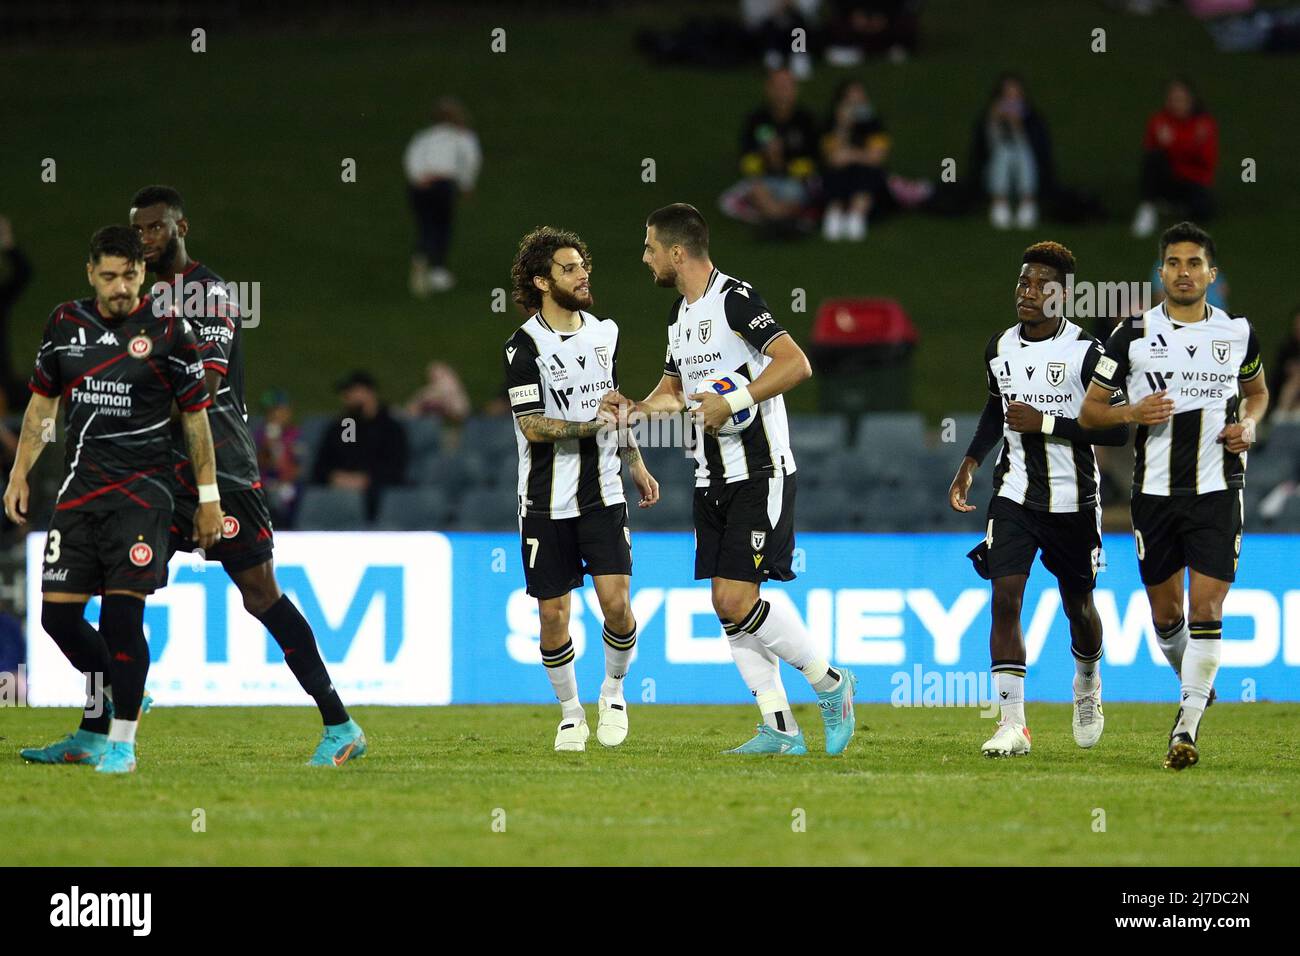 Sydney, NSW, Australia, 8 May 2022;  Campbelltown Sports Stadium, Sydney, NSW, Australia: A-League football, Macarthur FC versus Western Sydney Wanderers; Daniel De Silva and Tomi Juric of Macarthur FC shakes hands following Juric's successful Penalty shot in the 55th minute to make the score 1-1 Stock Photo